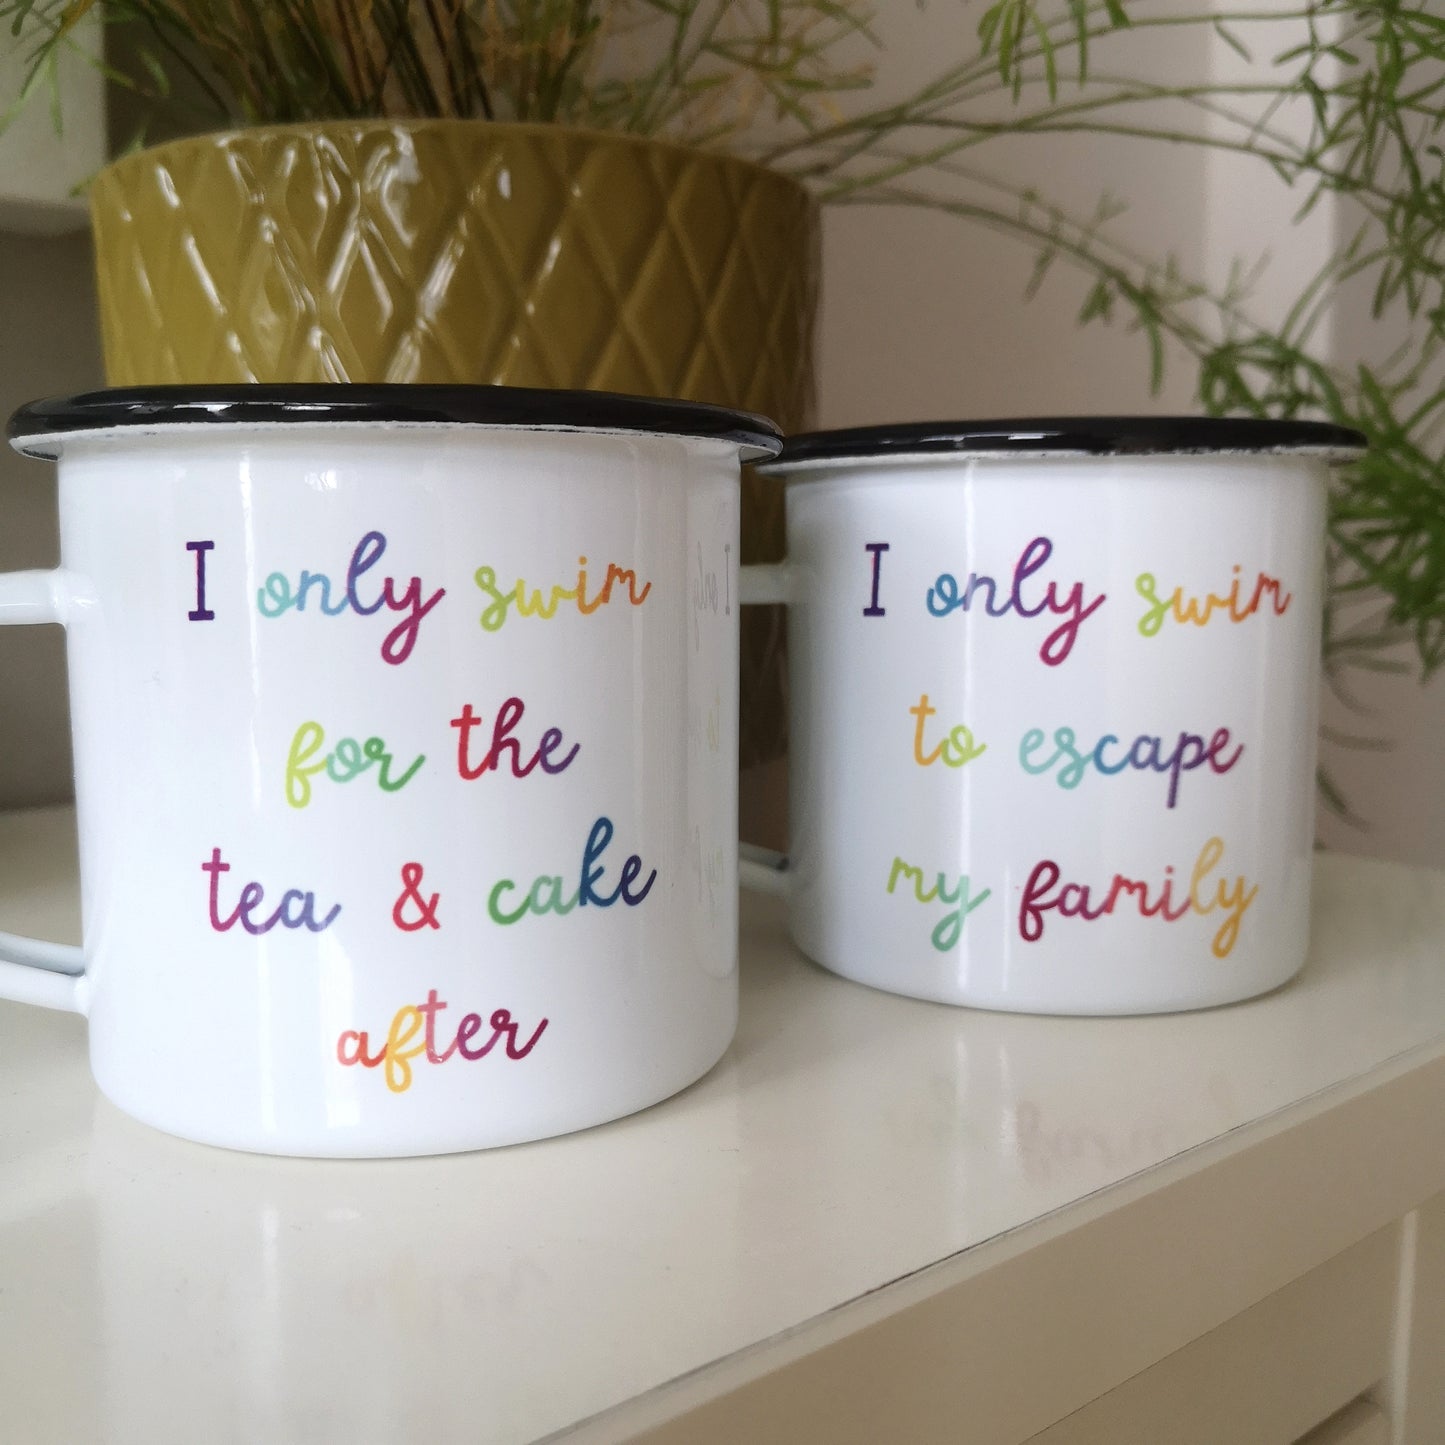 A steel enamel cup for your after-swim tipples, with a choice of 3 confessions in colourful rainbow text:  I only swim for the tea & cake after.  I only swim for the coffee & cake after.  I only swim to escape my family.